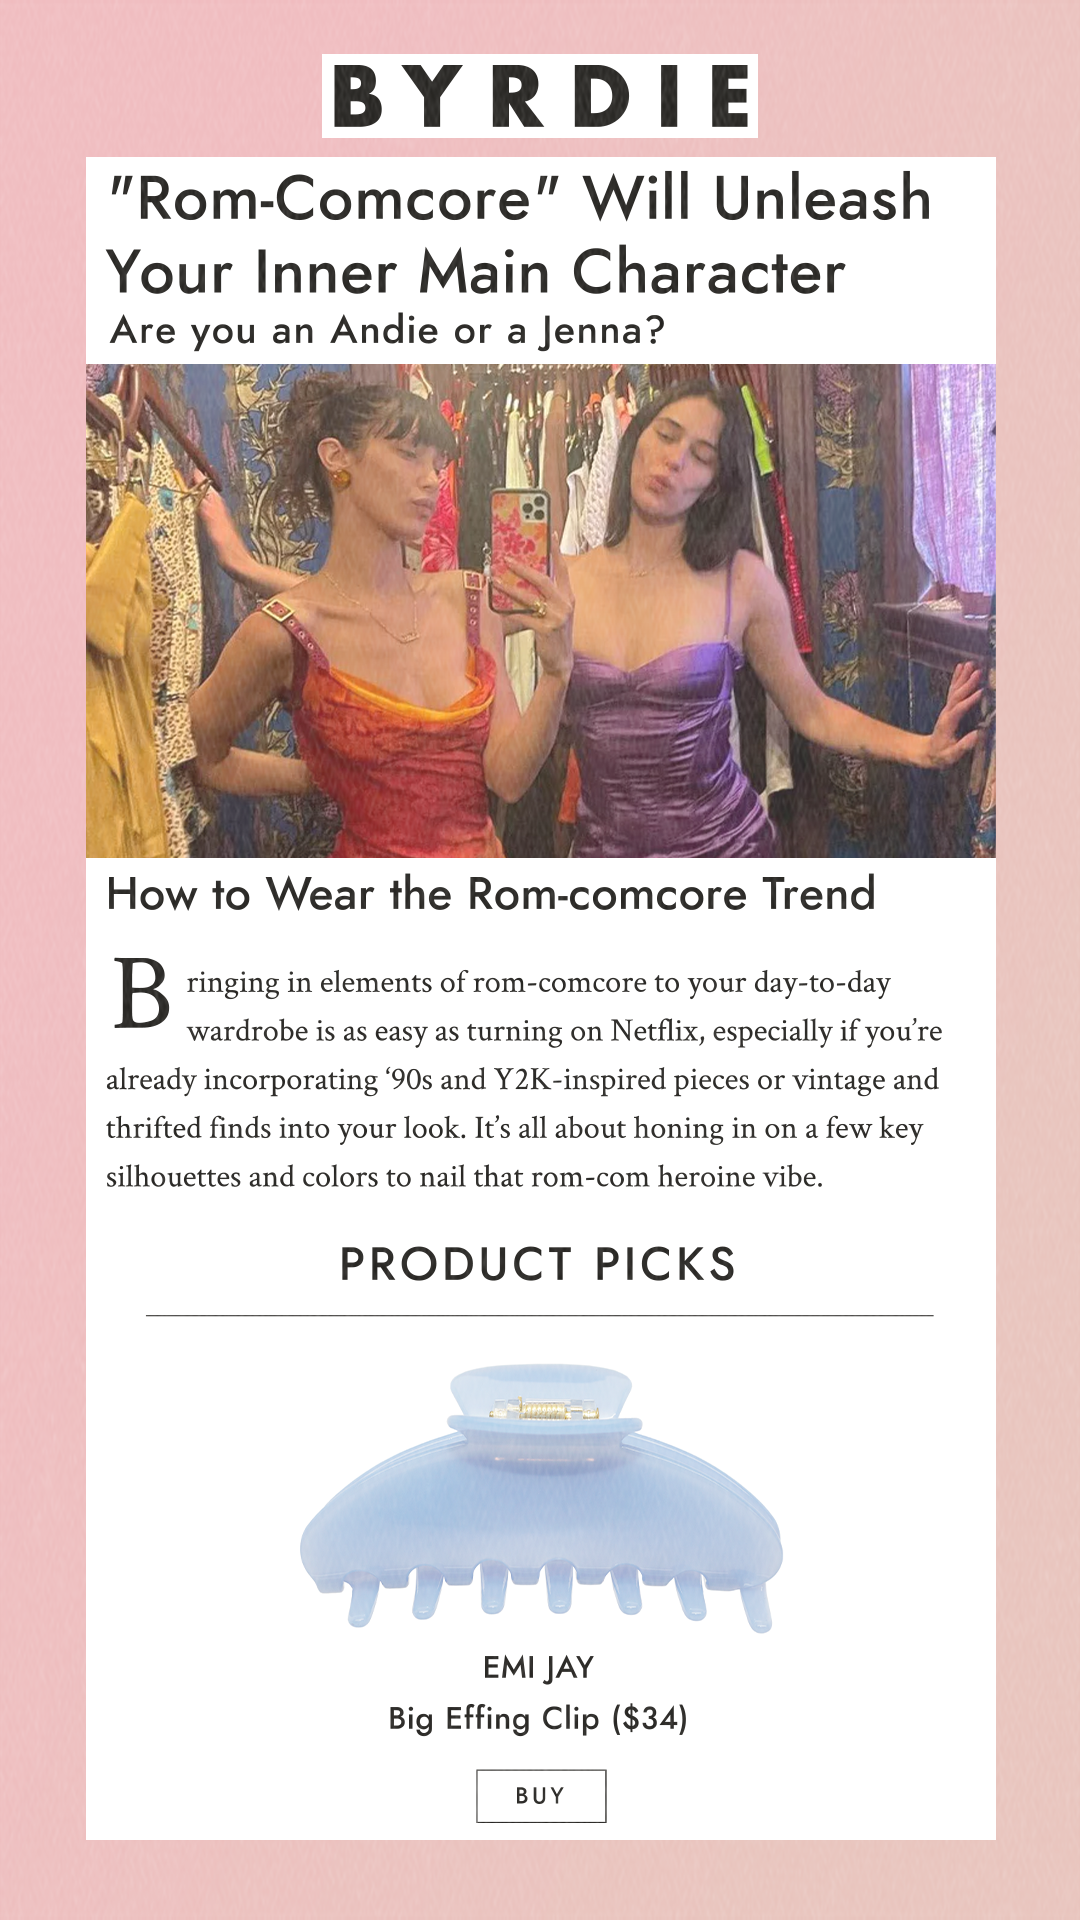 Rom-Comcore Will Unleash Your Inner Main Character Are you an Andie or a Jenna? How to Wear the Rom-comcore Trend Bringing in elements of rom-comcore to your day-to-day wardrobe is as easy as turning on Netflix, especially if you’re already incorporating ‘90s and Y2K-inspired pieces or vintage and thrifted finds into your look. It’s all about honing in on a few key silhouettes and colors to nail that rom-com heroine vibe. Product Picks Emi Jay Big Effing Clip $34 Buy